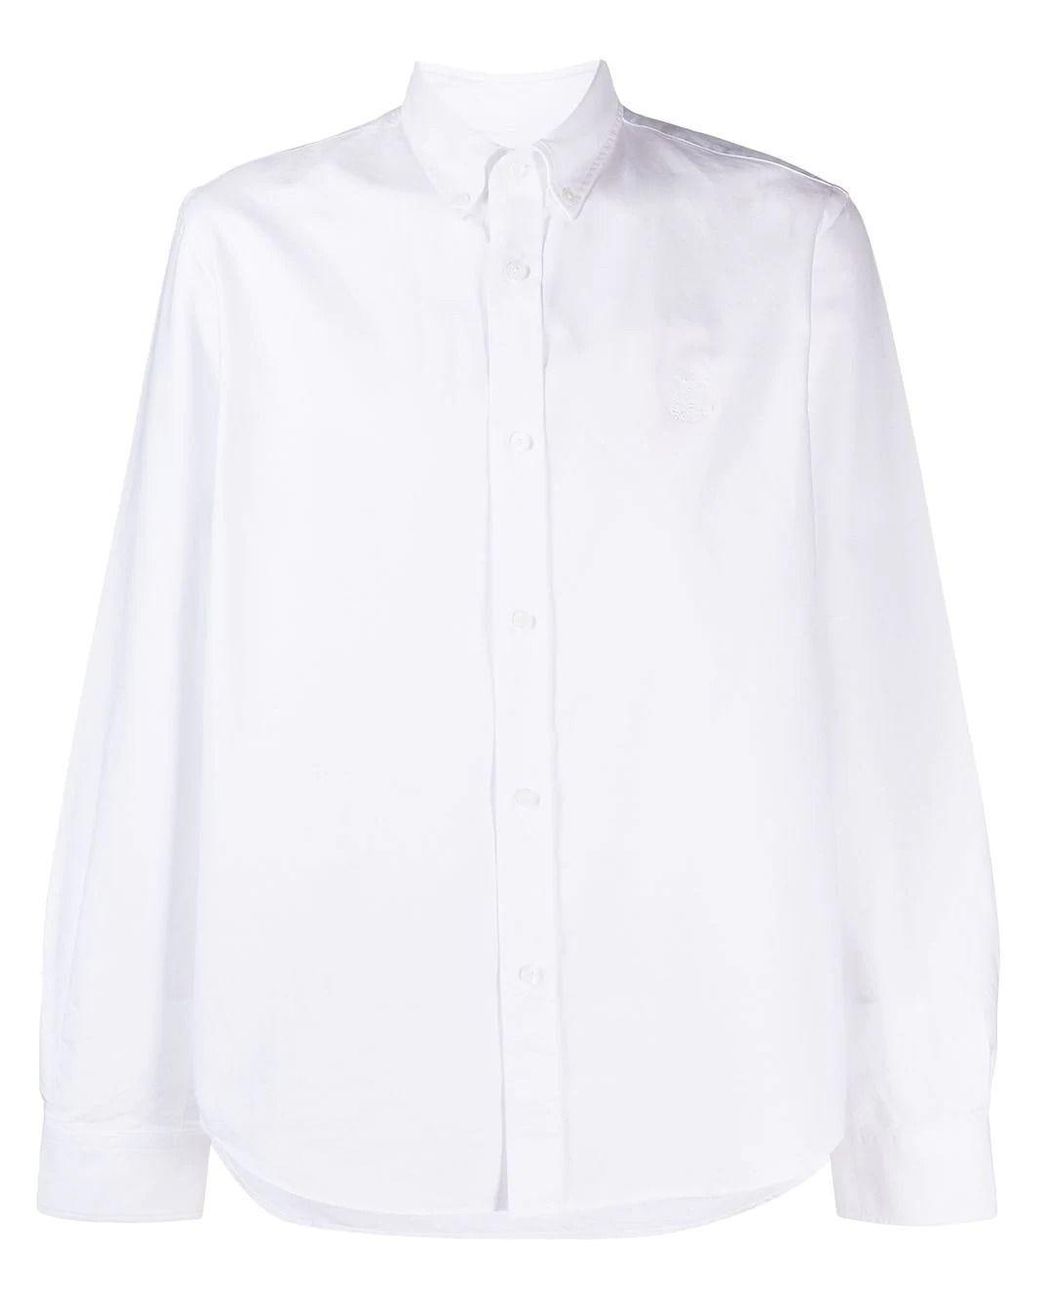 KENZO Cotton Tiger Crest Casual Shirt in White for Men - Lyst